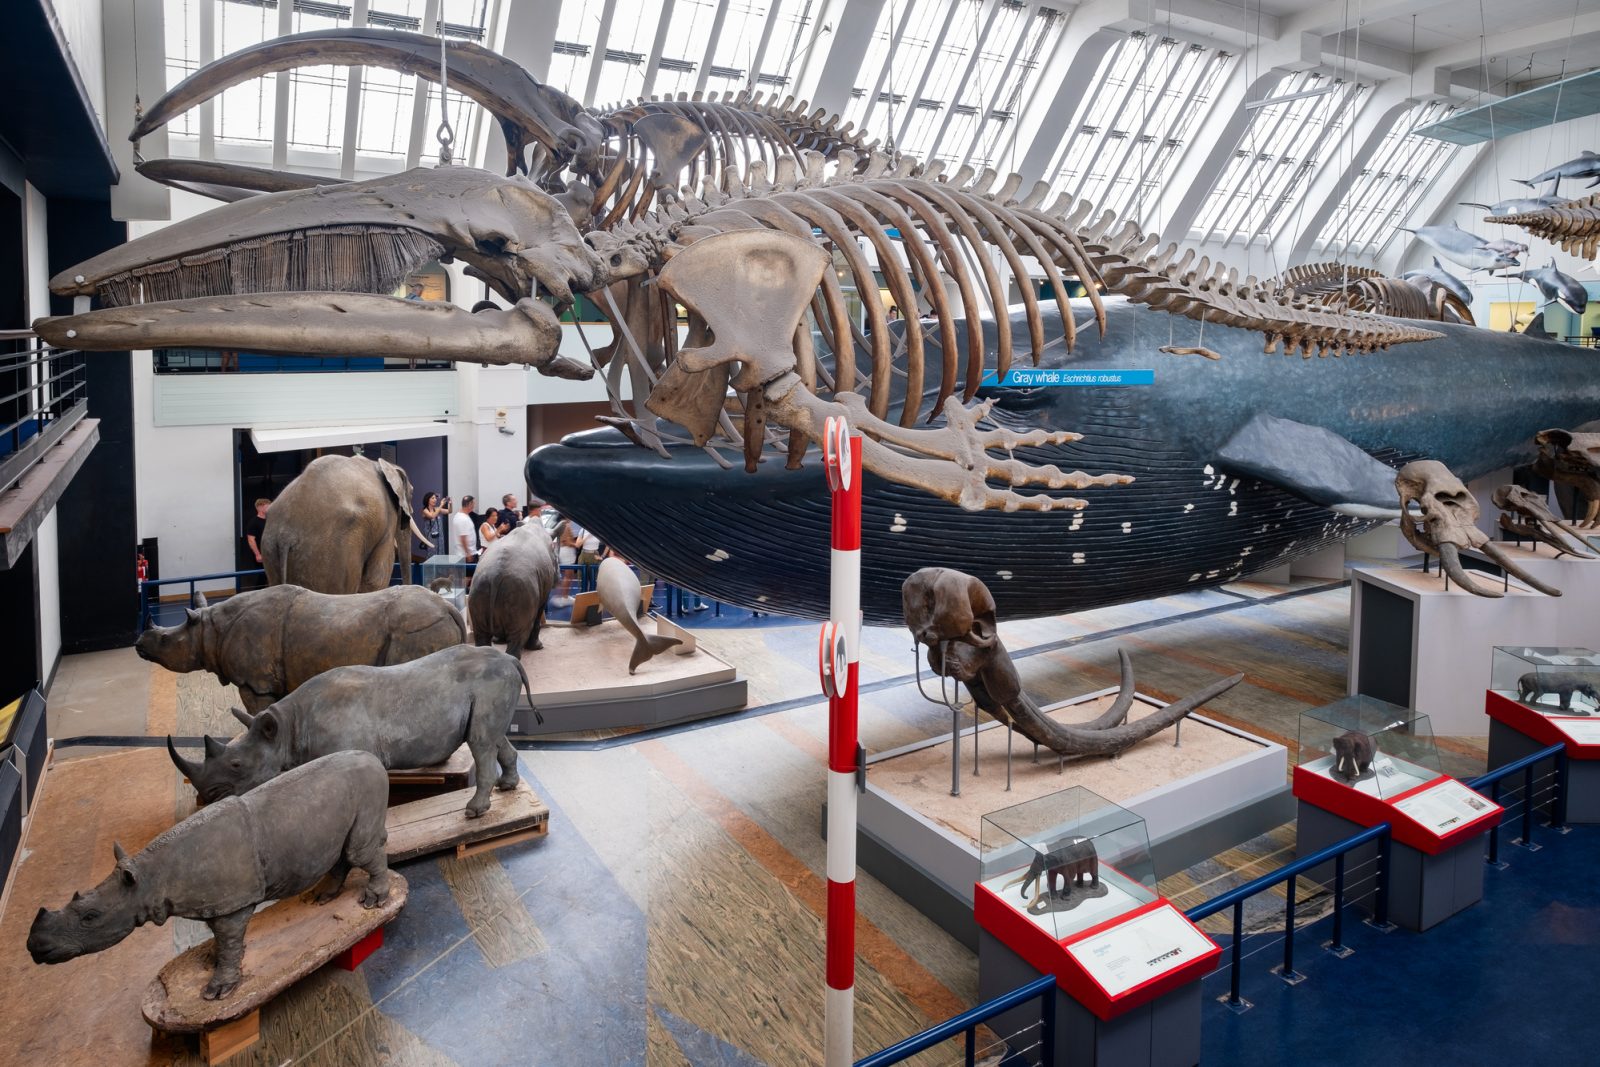 The Mammals Gallery at the Natural History Museum in London